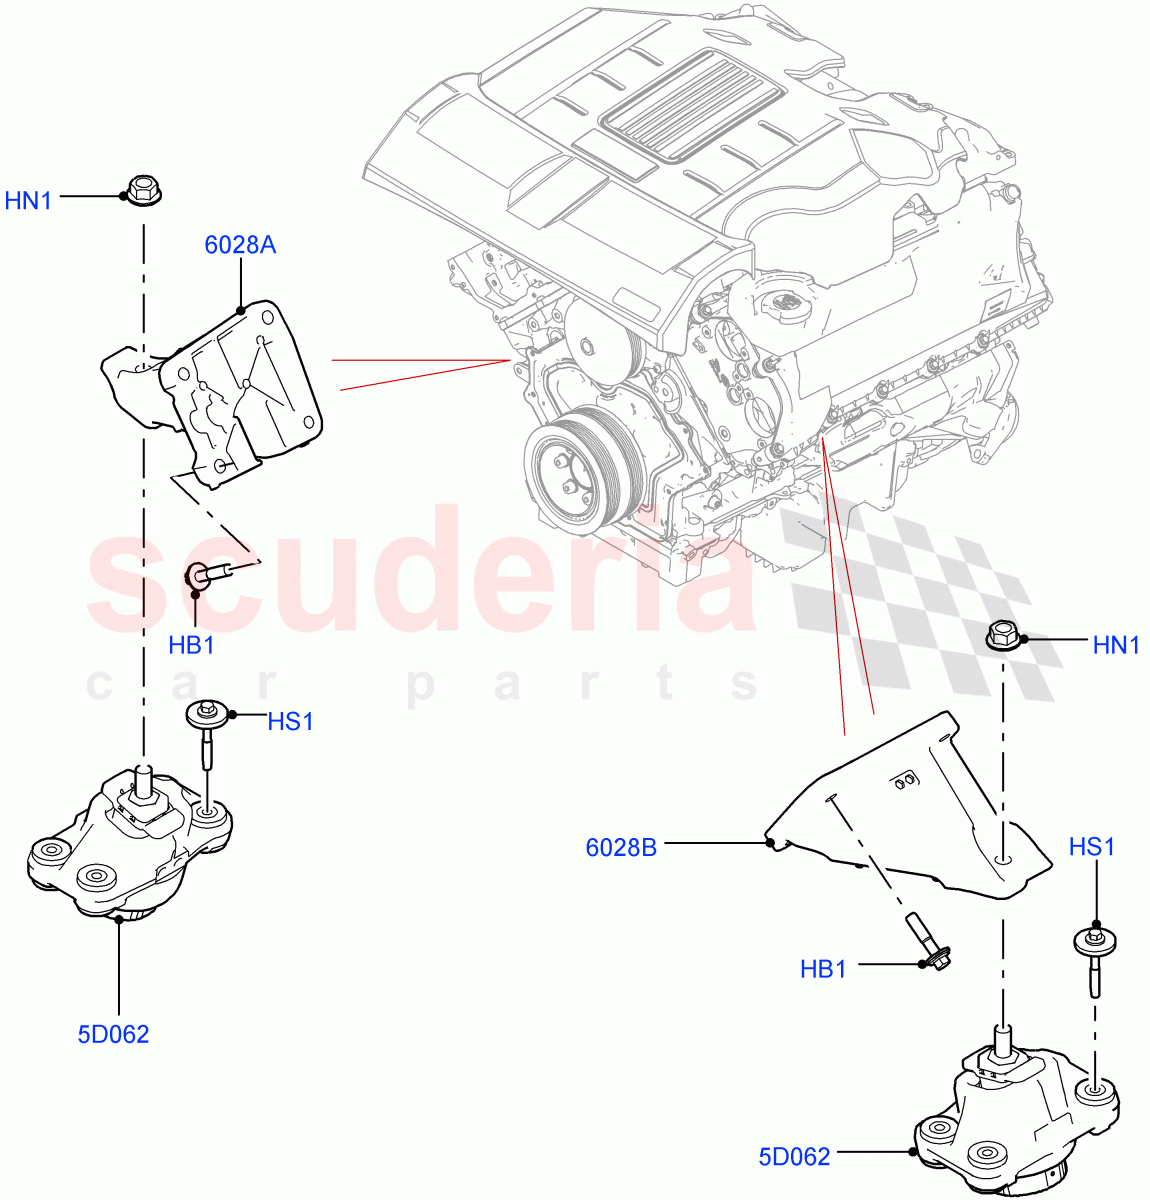 Engine Mounting(Solihull Plant Build)(3.0L DOHC GDI SC V6 PETROL)((V)FROMHA000001) of Land Rover Land Rover Discovery 5 (2017+) [2.0 Turbo Petrol AJ200P]